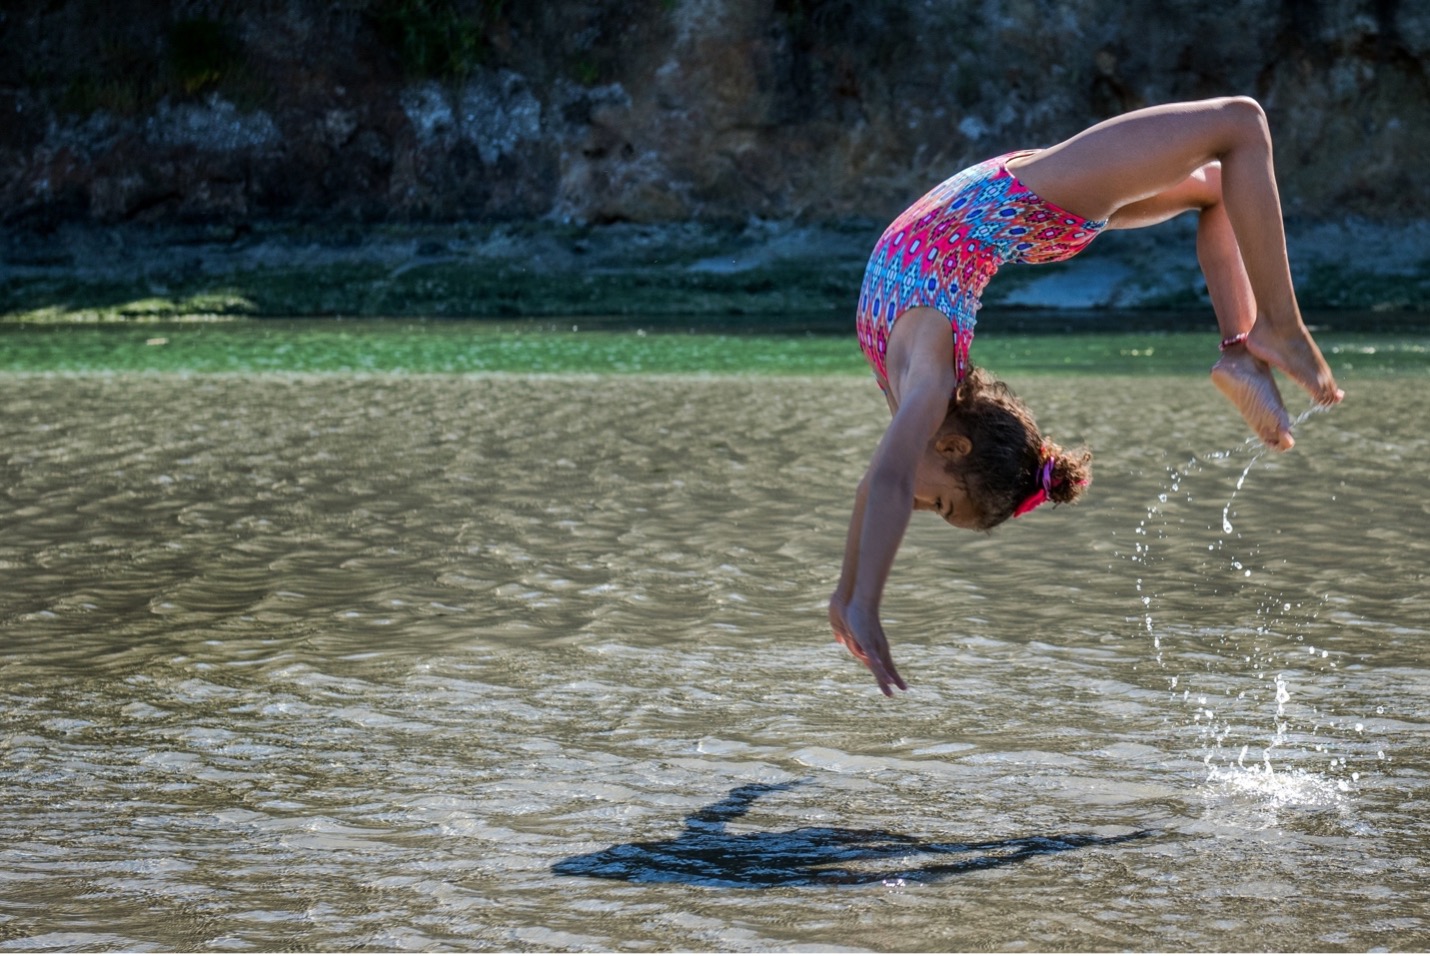 Kick Summer Boredom to the Curb With These Fun At-Home Gymnastics Challenges